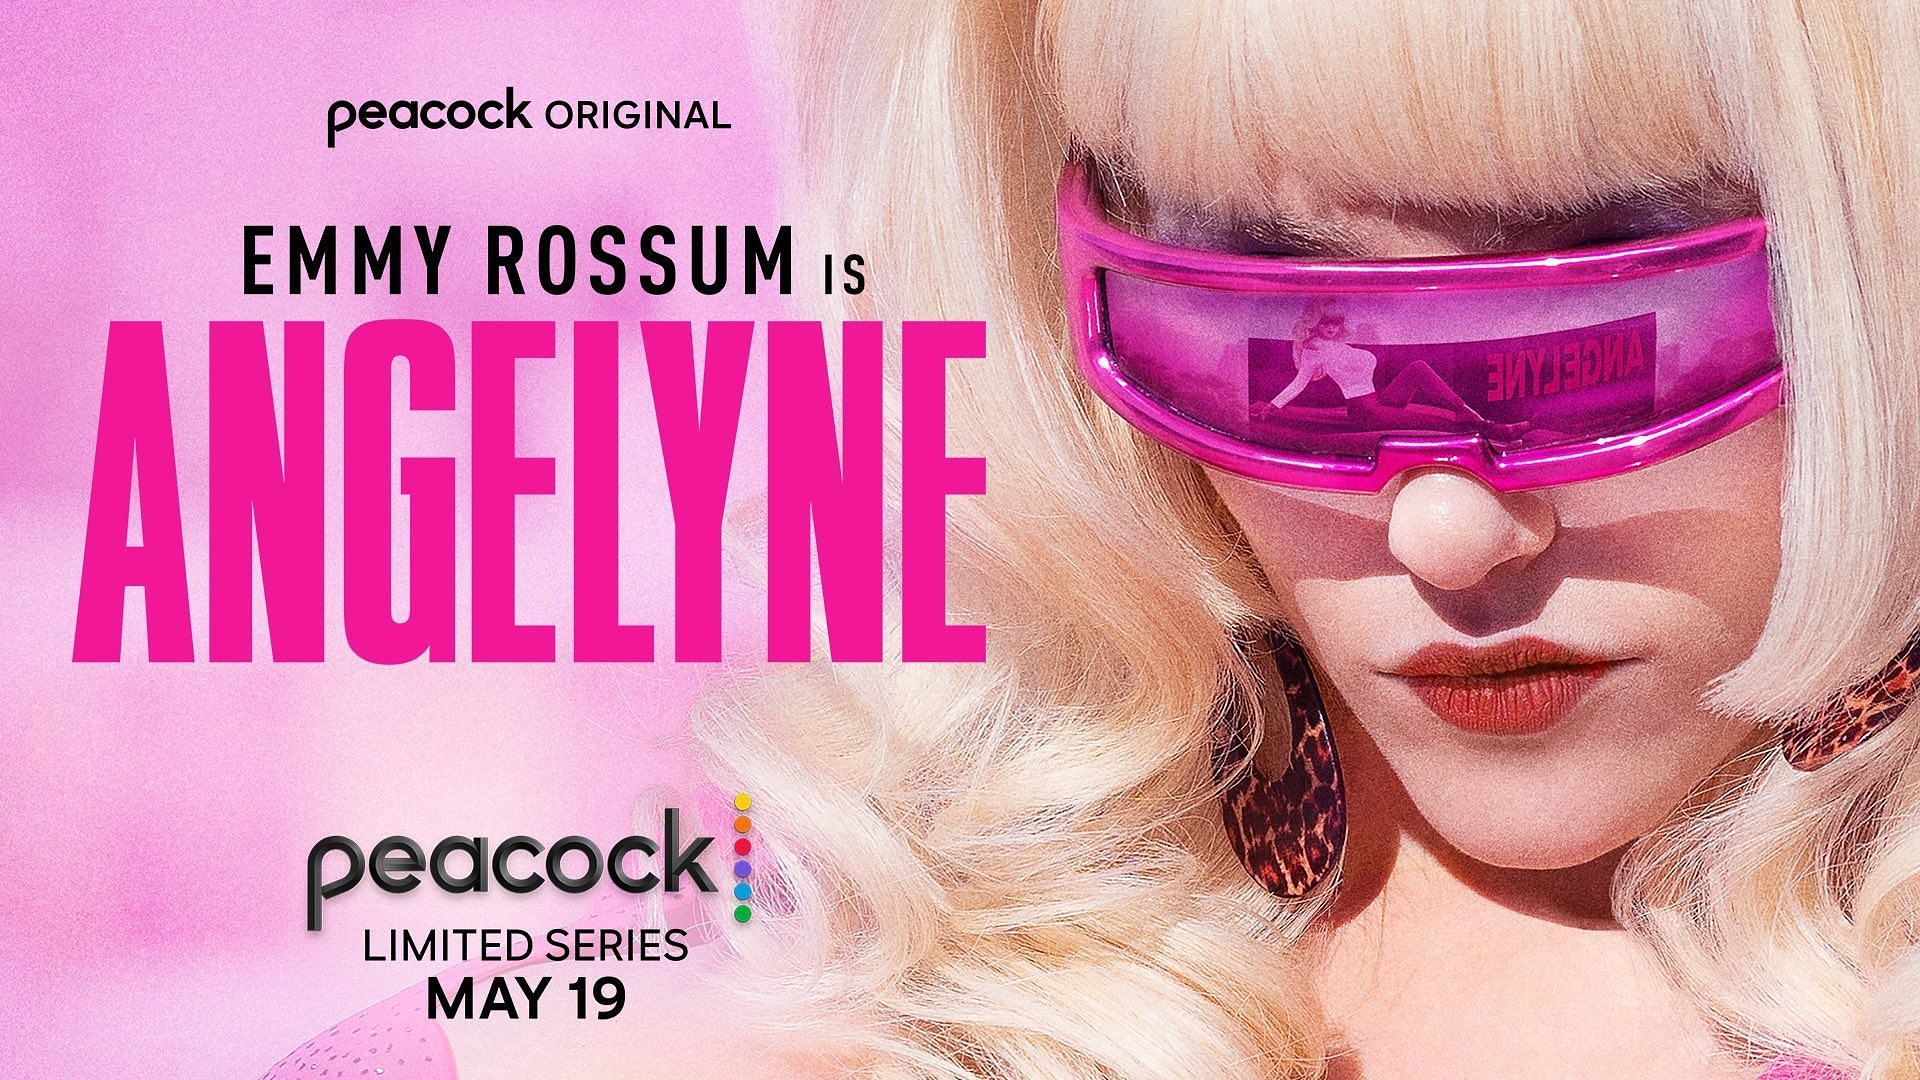 Emmy Rossum-starrer Angelyne is set to premiere on May 19 exclusively on Peacock (Image via @emmyrossum/Twitter)